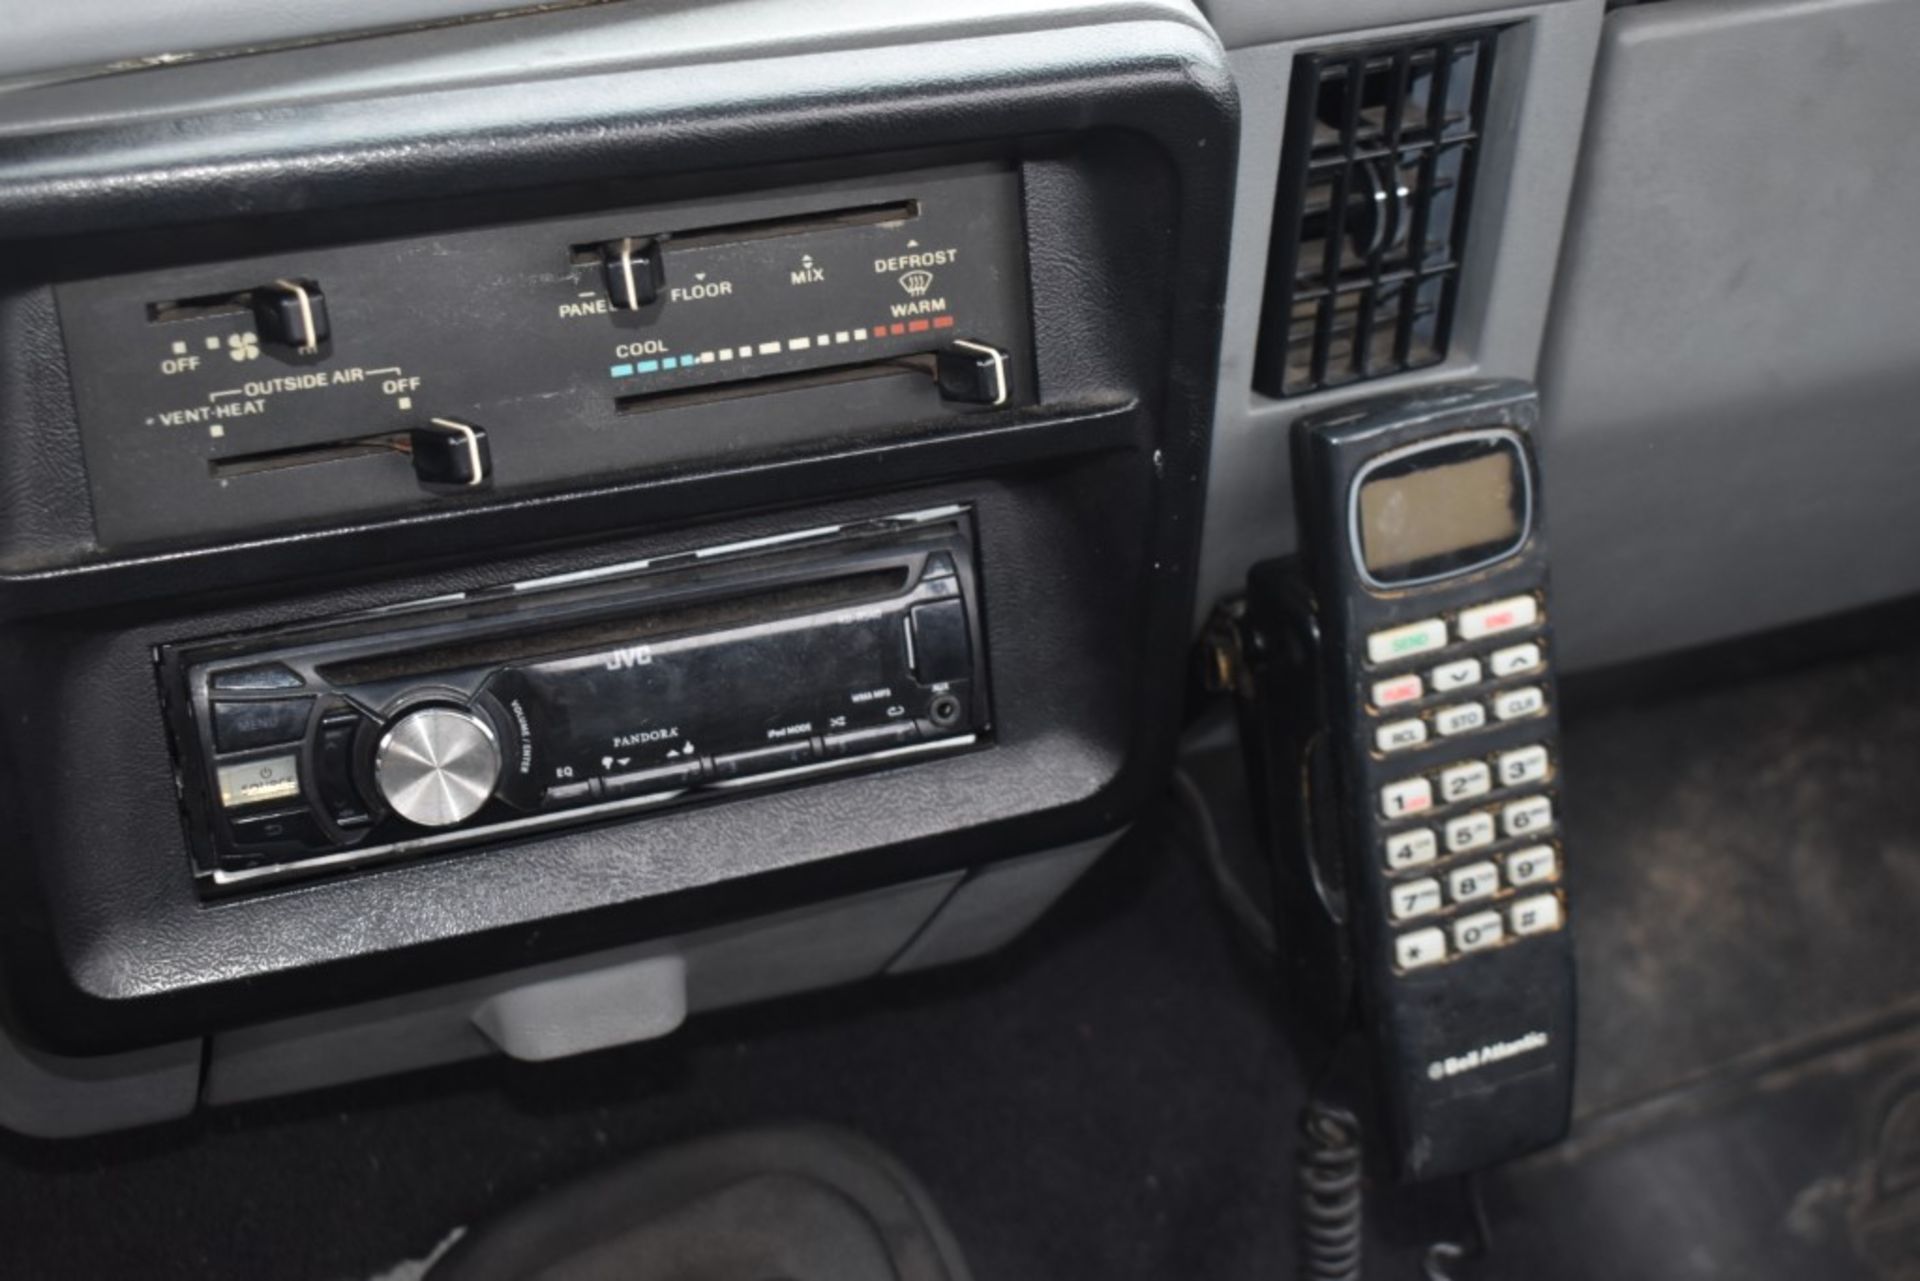 1987 Ford F-150 Truck - Image 35 of 36